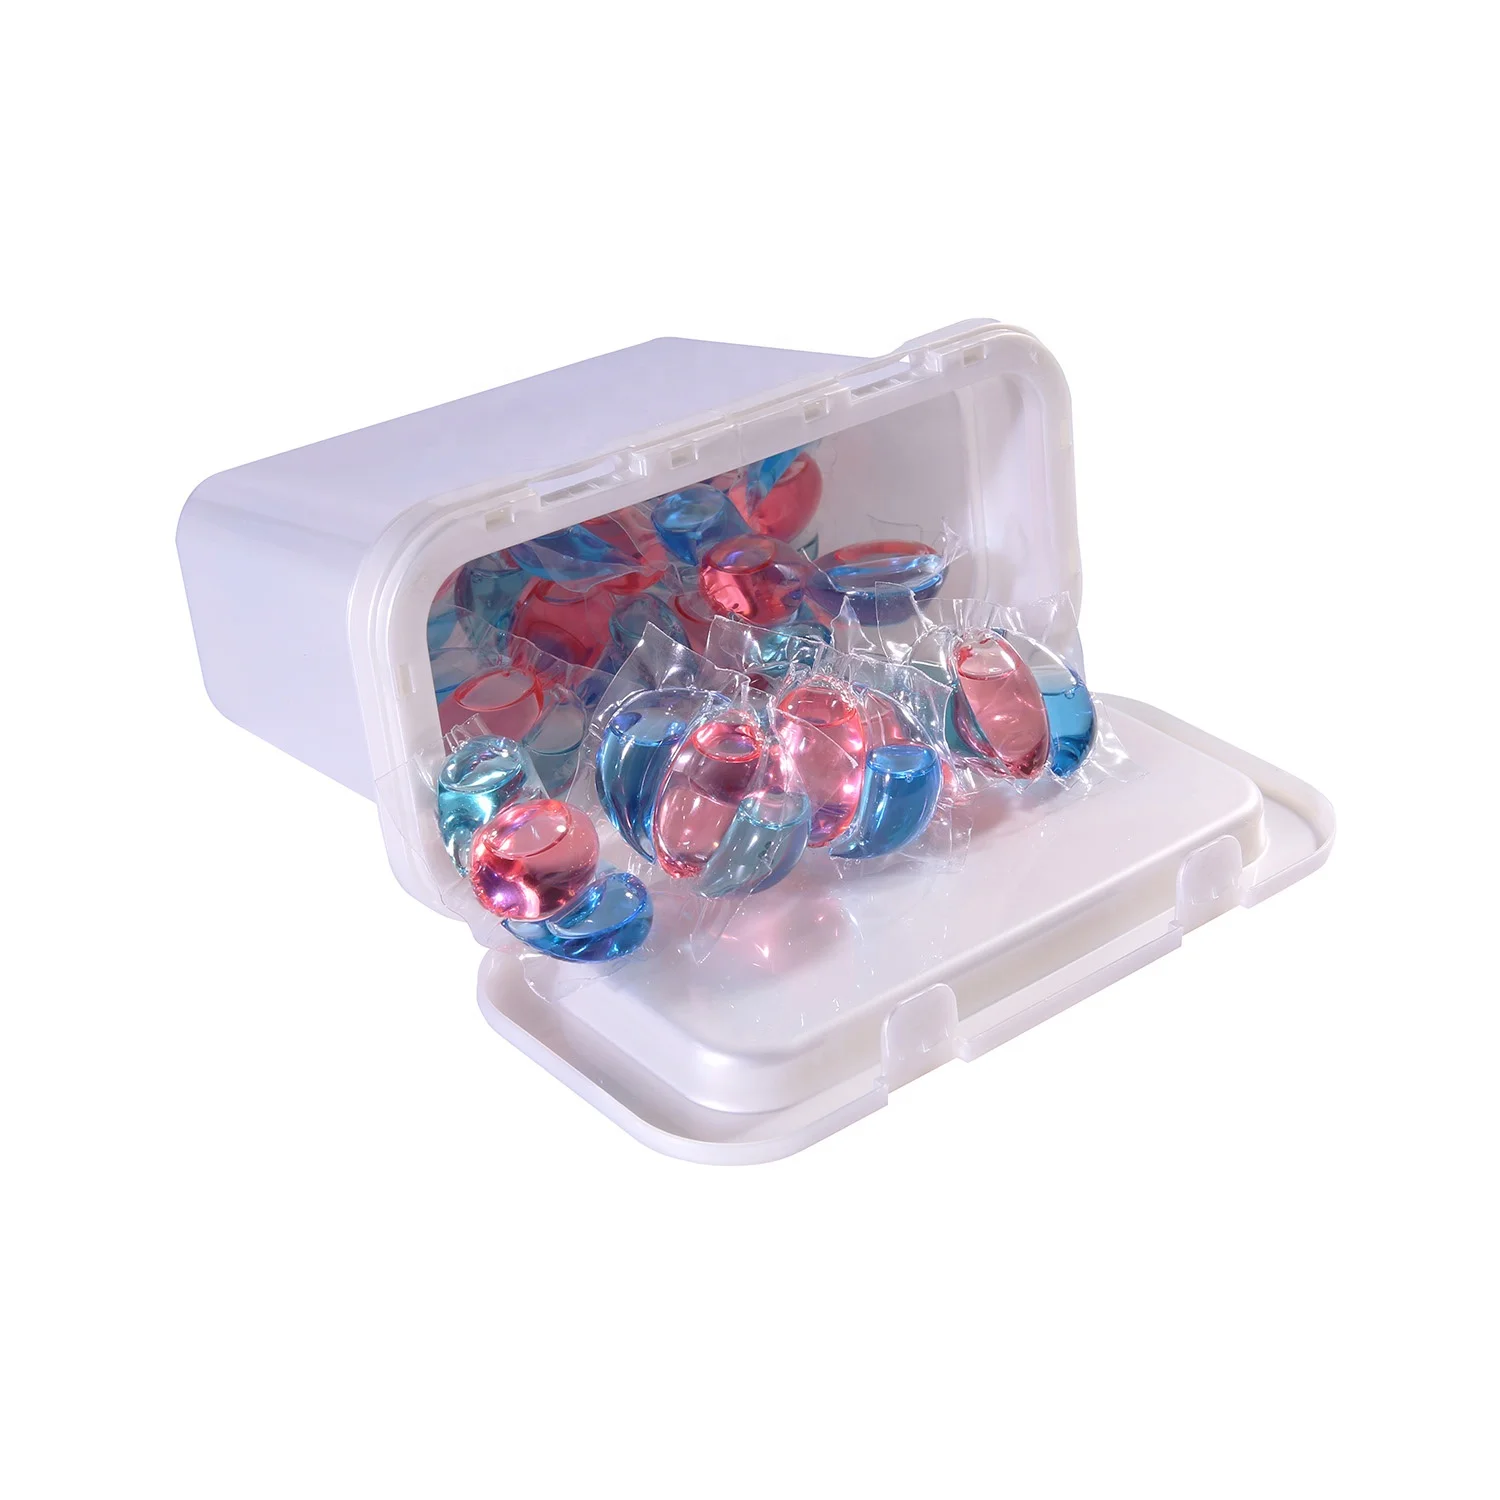 disinfect anti bacterial biodegradable plastic free laundry pods for laundry